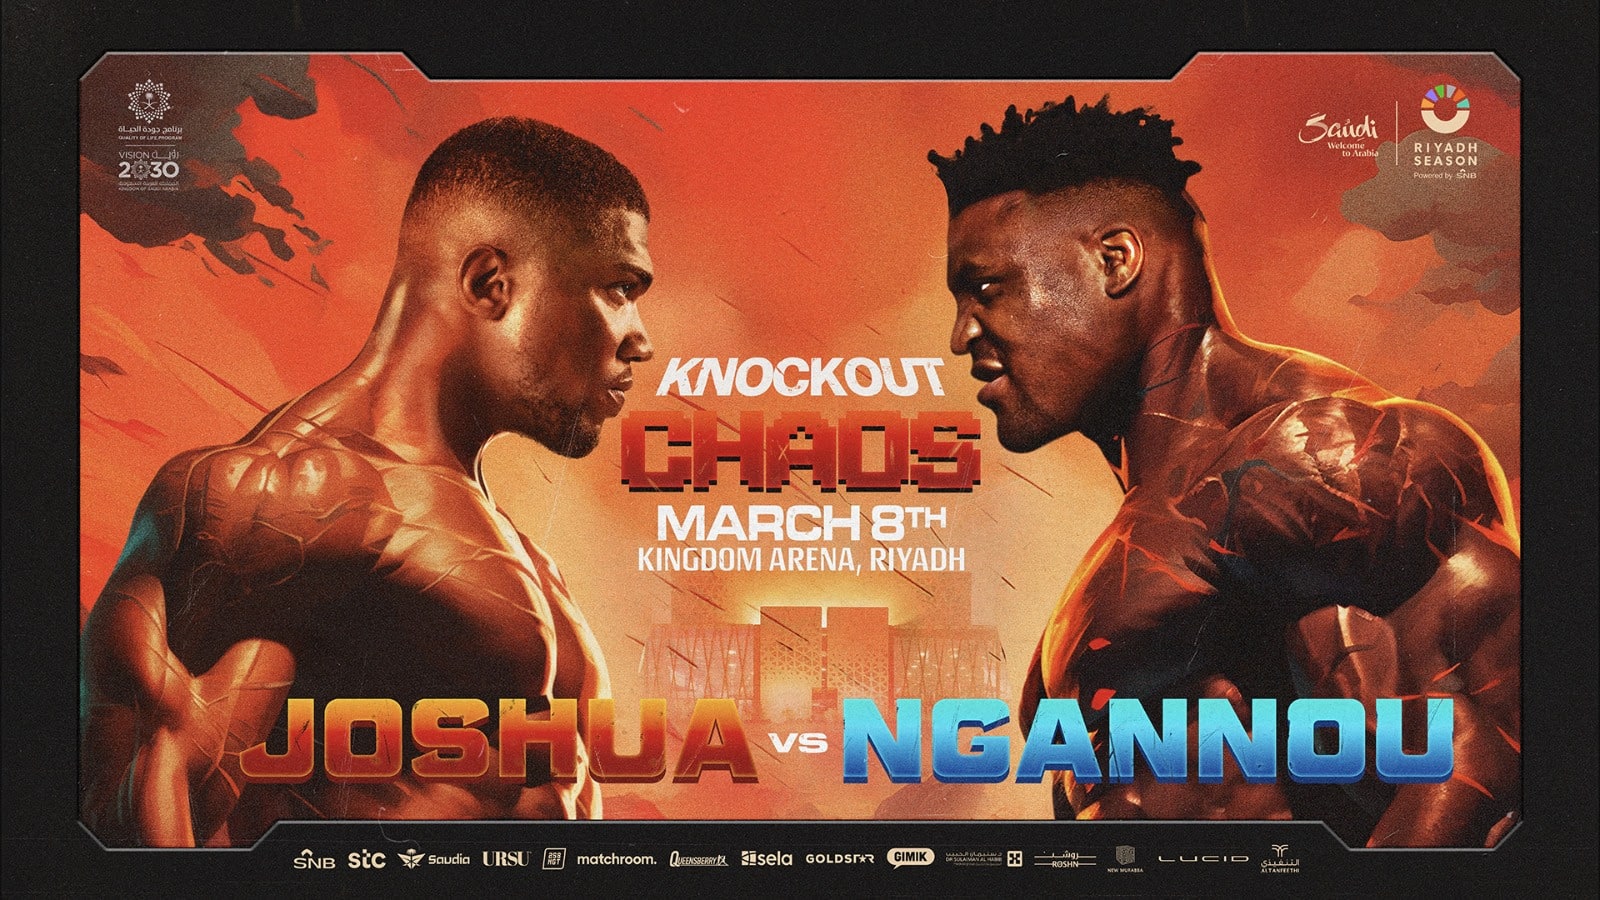 Hearn Hypes Ngannou Fight: “Godzilla vs. King Kong” with High Stakes for Joshua